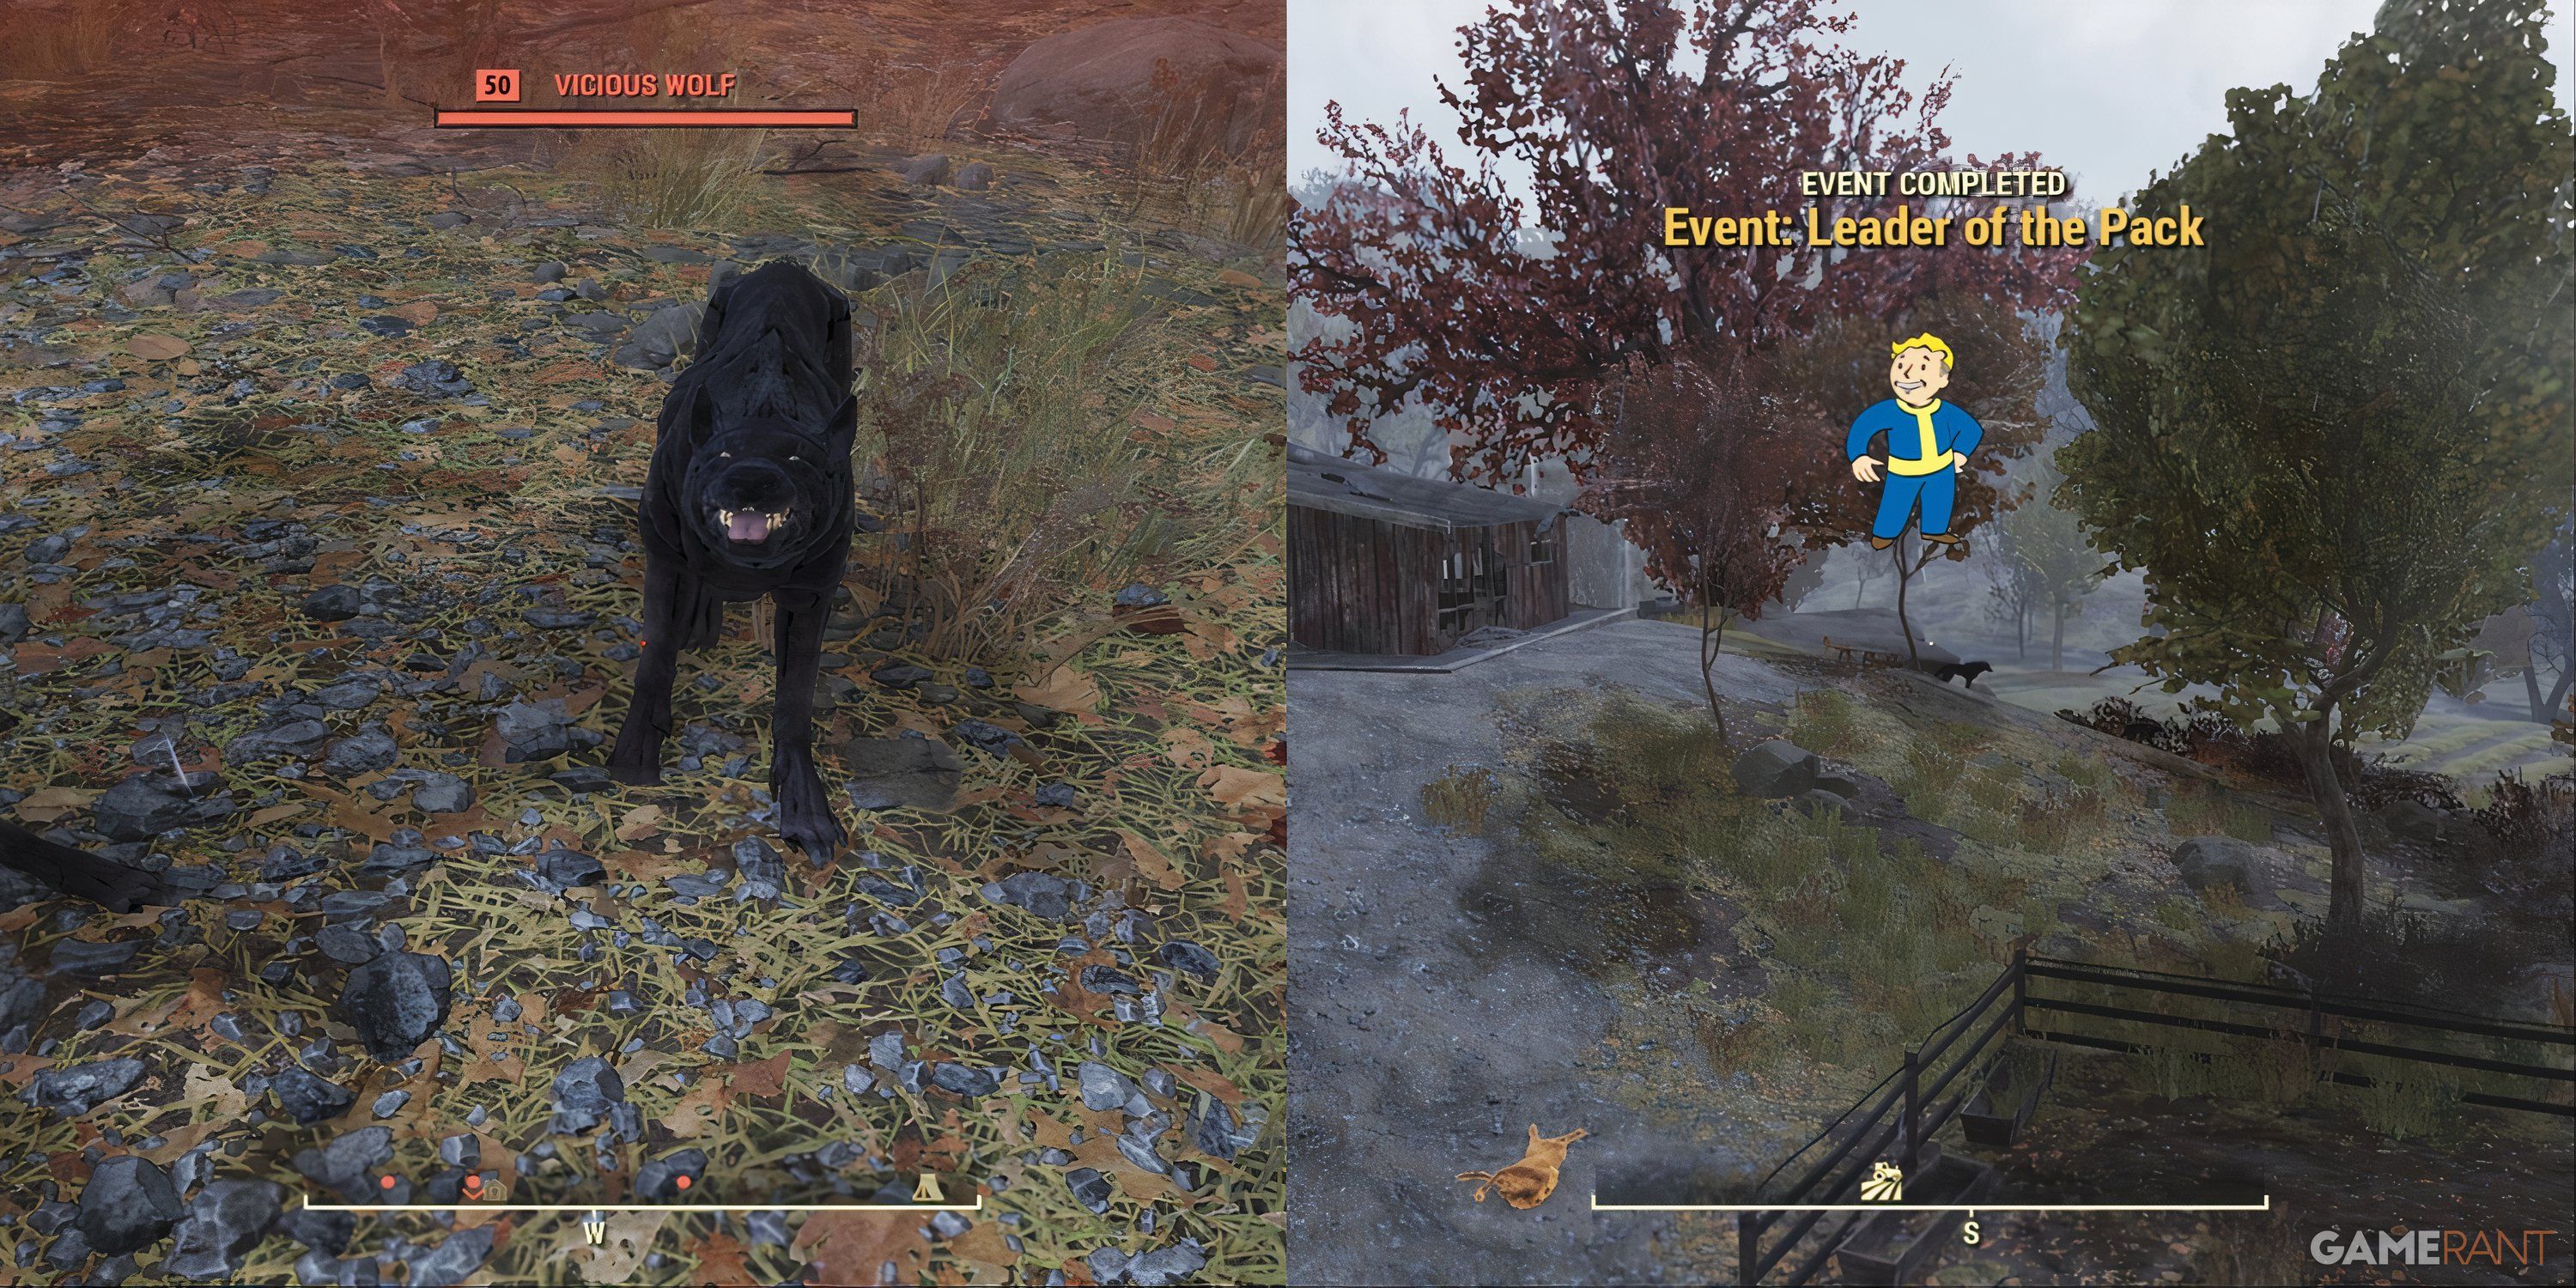 Leader Of The Pack Event in Fallout 76